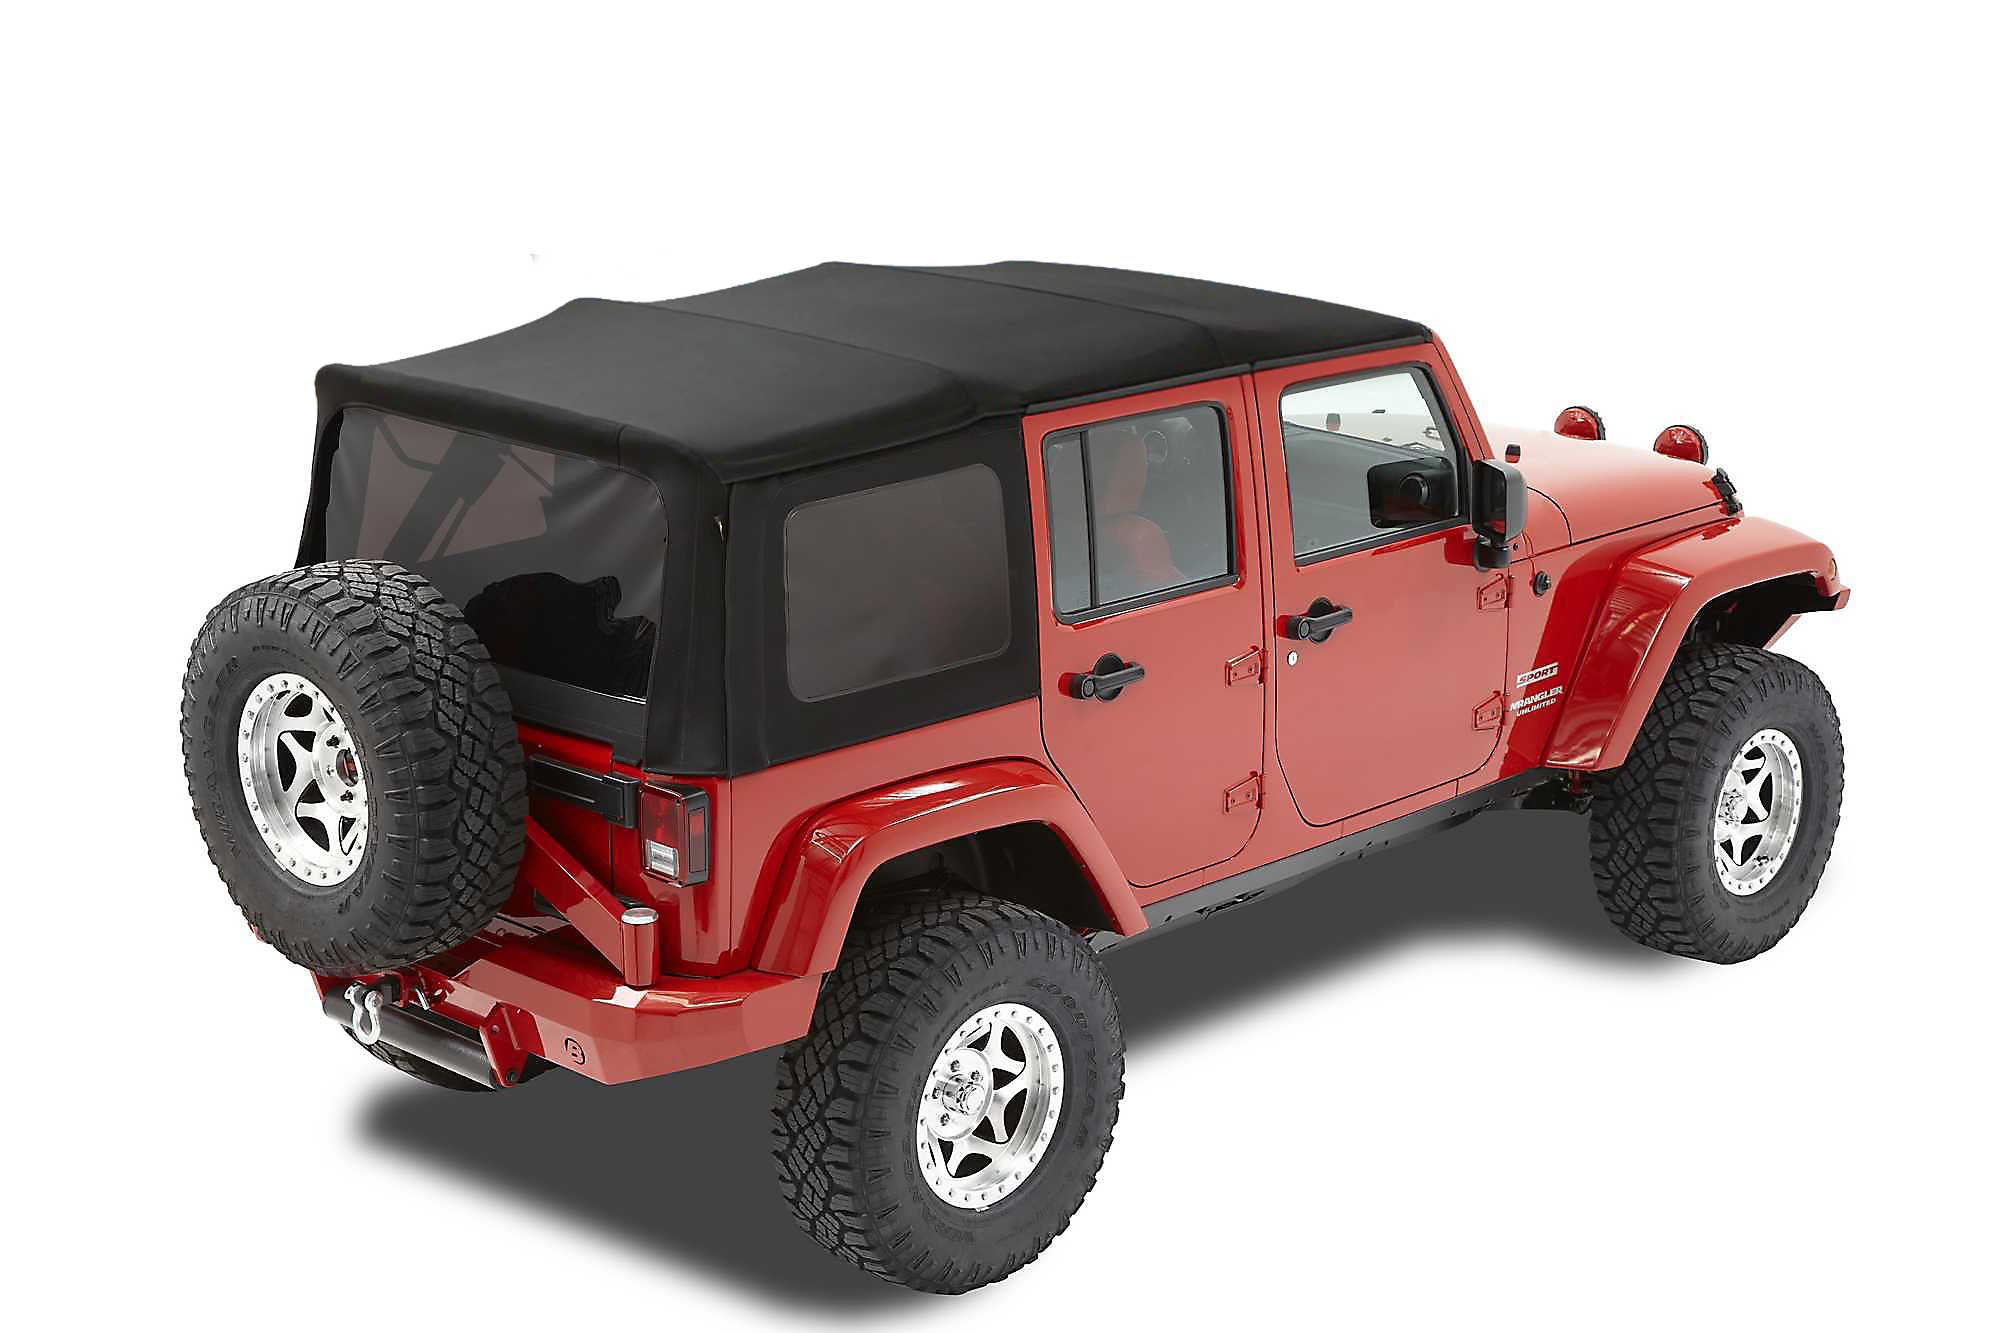 What Is The Best Material For A Jeep Wrangler Soft Top? | Quadratec